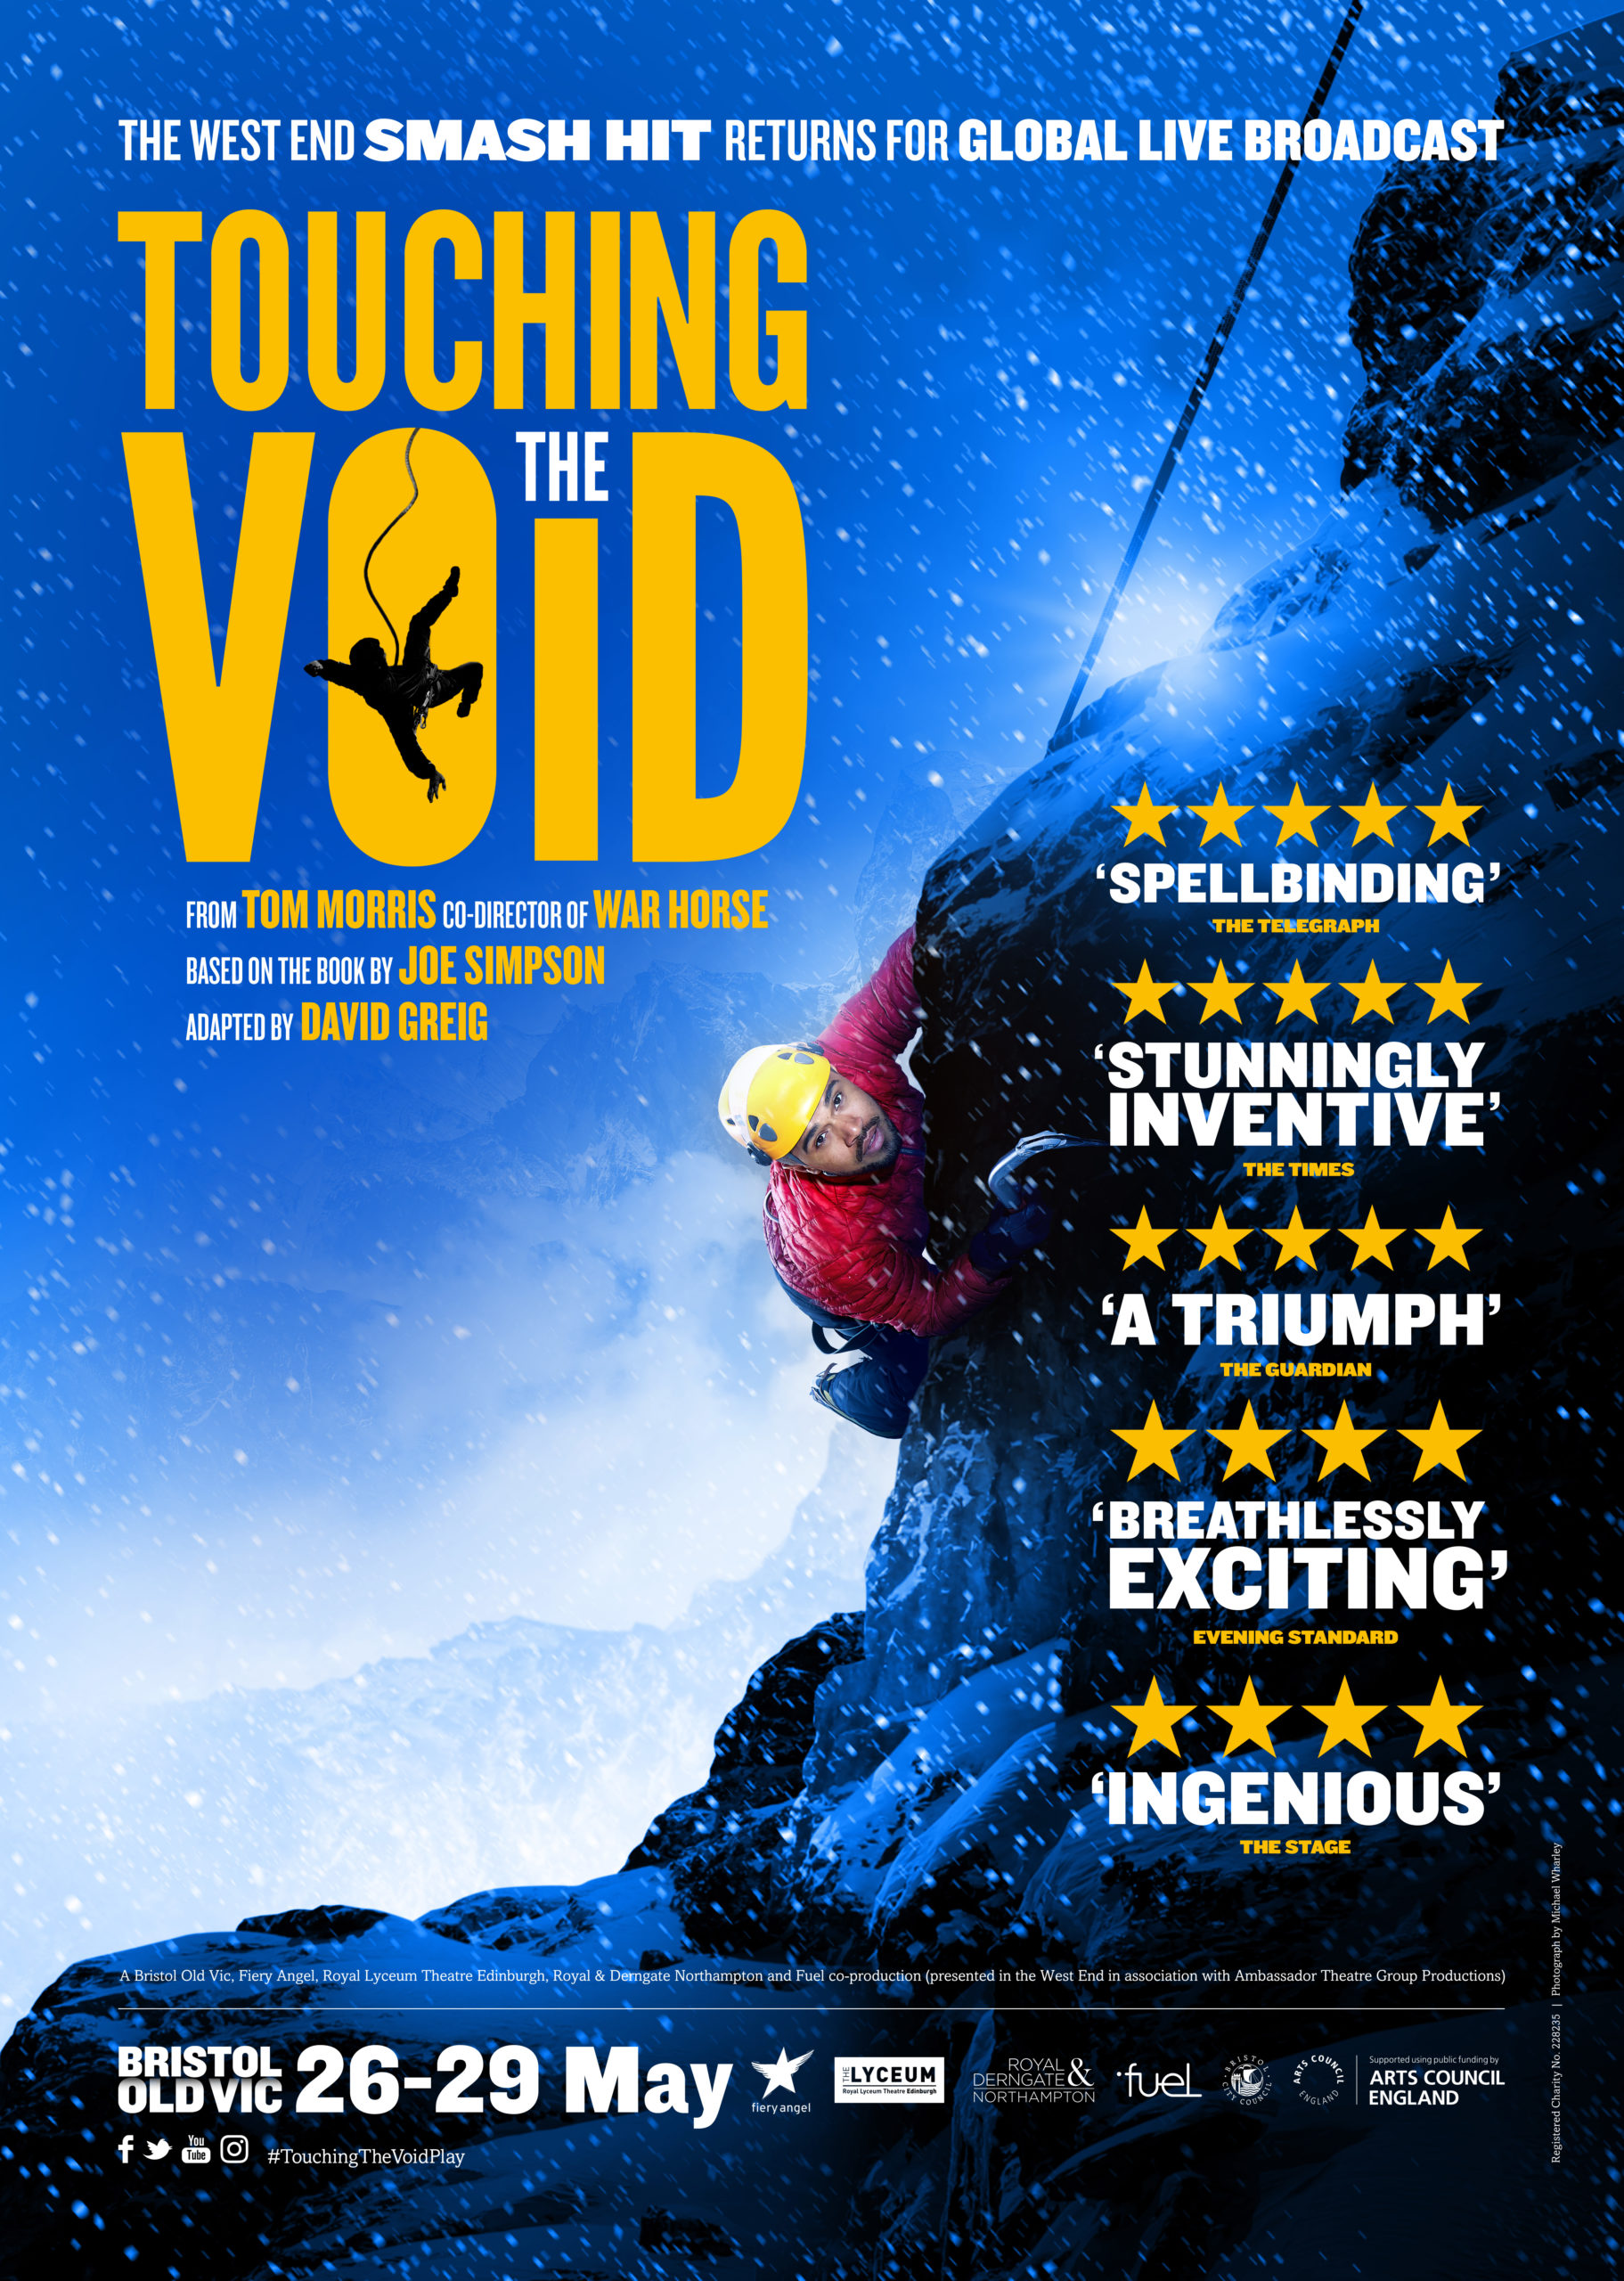 The West End Smash Hit Returns for Global Live Broadcast. Touching the Void. From Tom Morris Co-director of War Horse, Based on the book by Joe Simpson, Adapted by David Greig. Five Stars: "spellbinding" (The Telegraph", "Stunningly inventive" (The Times), "A triumph" (The Guardian), "Breathlessly exciting" (The Evening Standard), "Ingenious" (the stage). May 26-29. From the Bristol Old Vic.